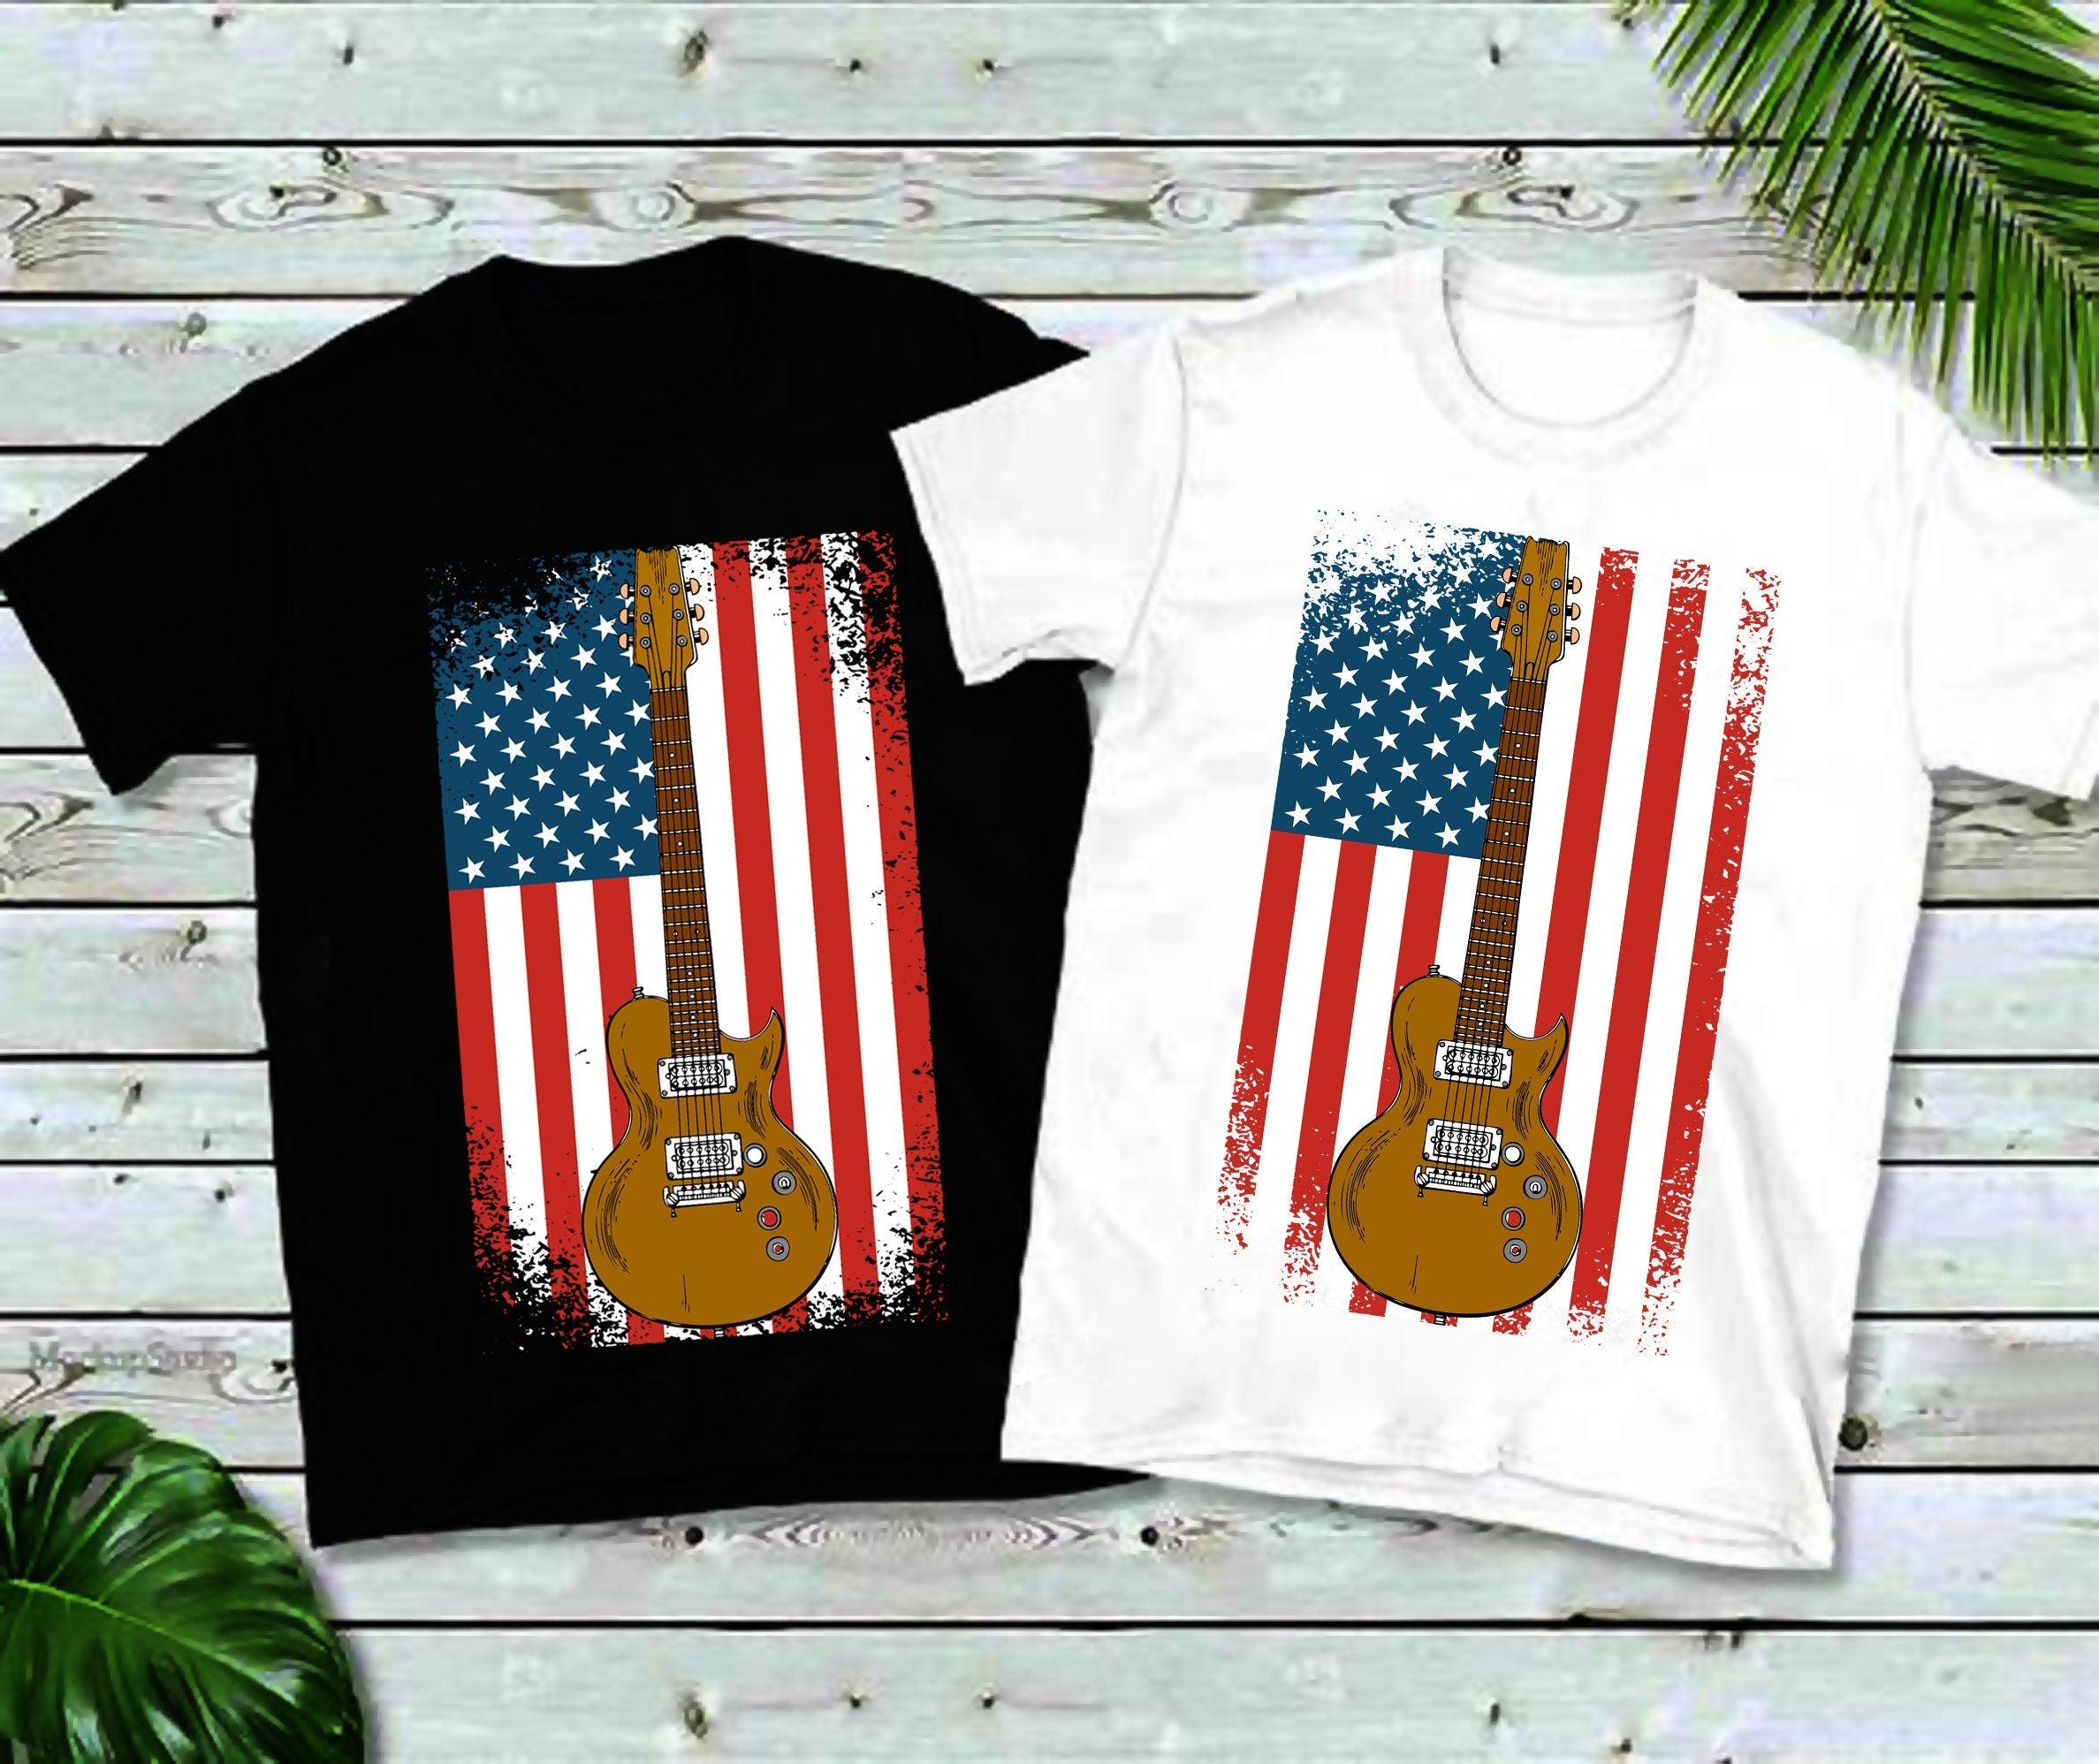 Classic Guitar Distressed American Flag T-Shirts,America Shirt, America T, 4th of July Tee, Unisex Sized, music lover guitar player USA love 4th of july shirt, 4th of July Tee, America Shirt, american flag shirt, classic guitar, distressed American, fourth of july shirt, July 4th USA USA, music lover guitar, patriotic shirt, red white and blue, usa shirt, USA T - plusminusco.com